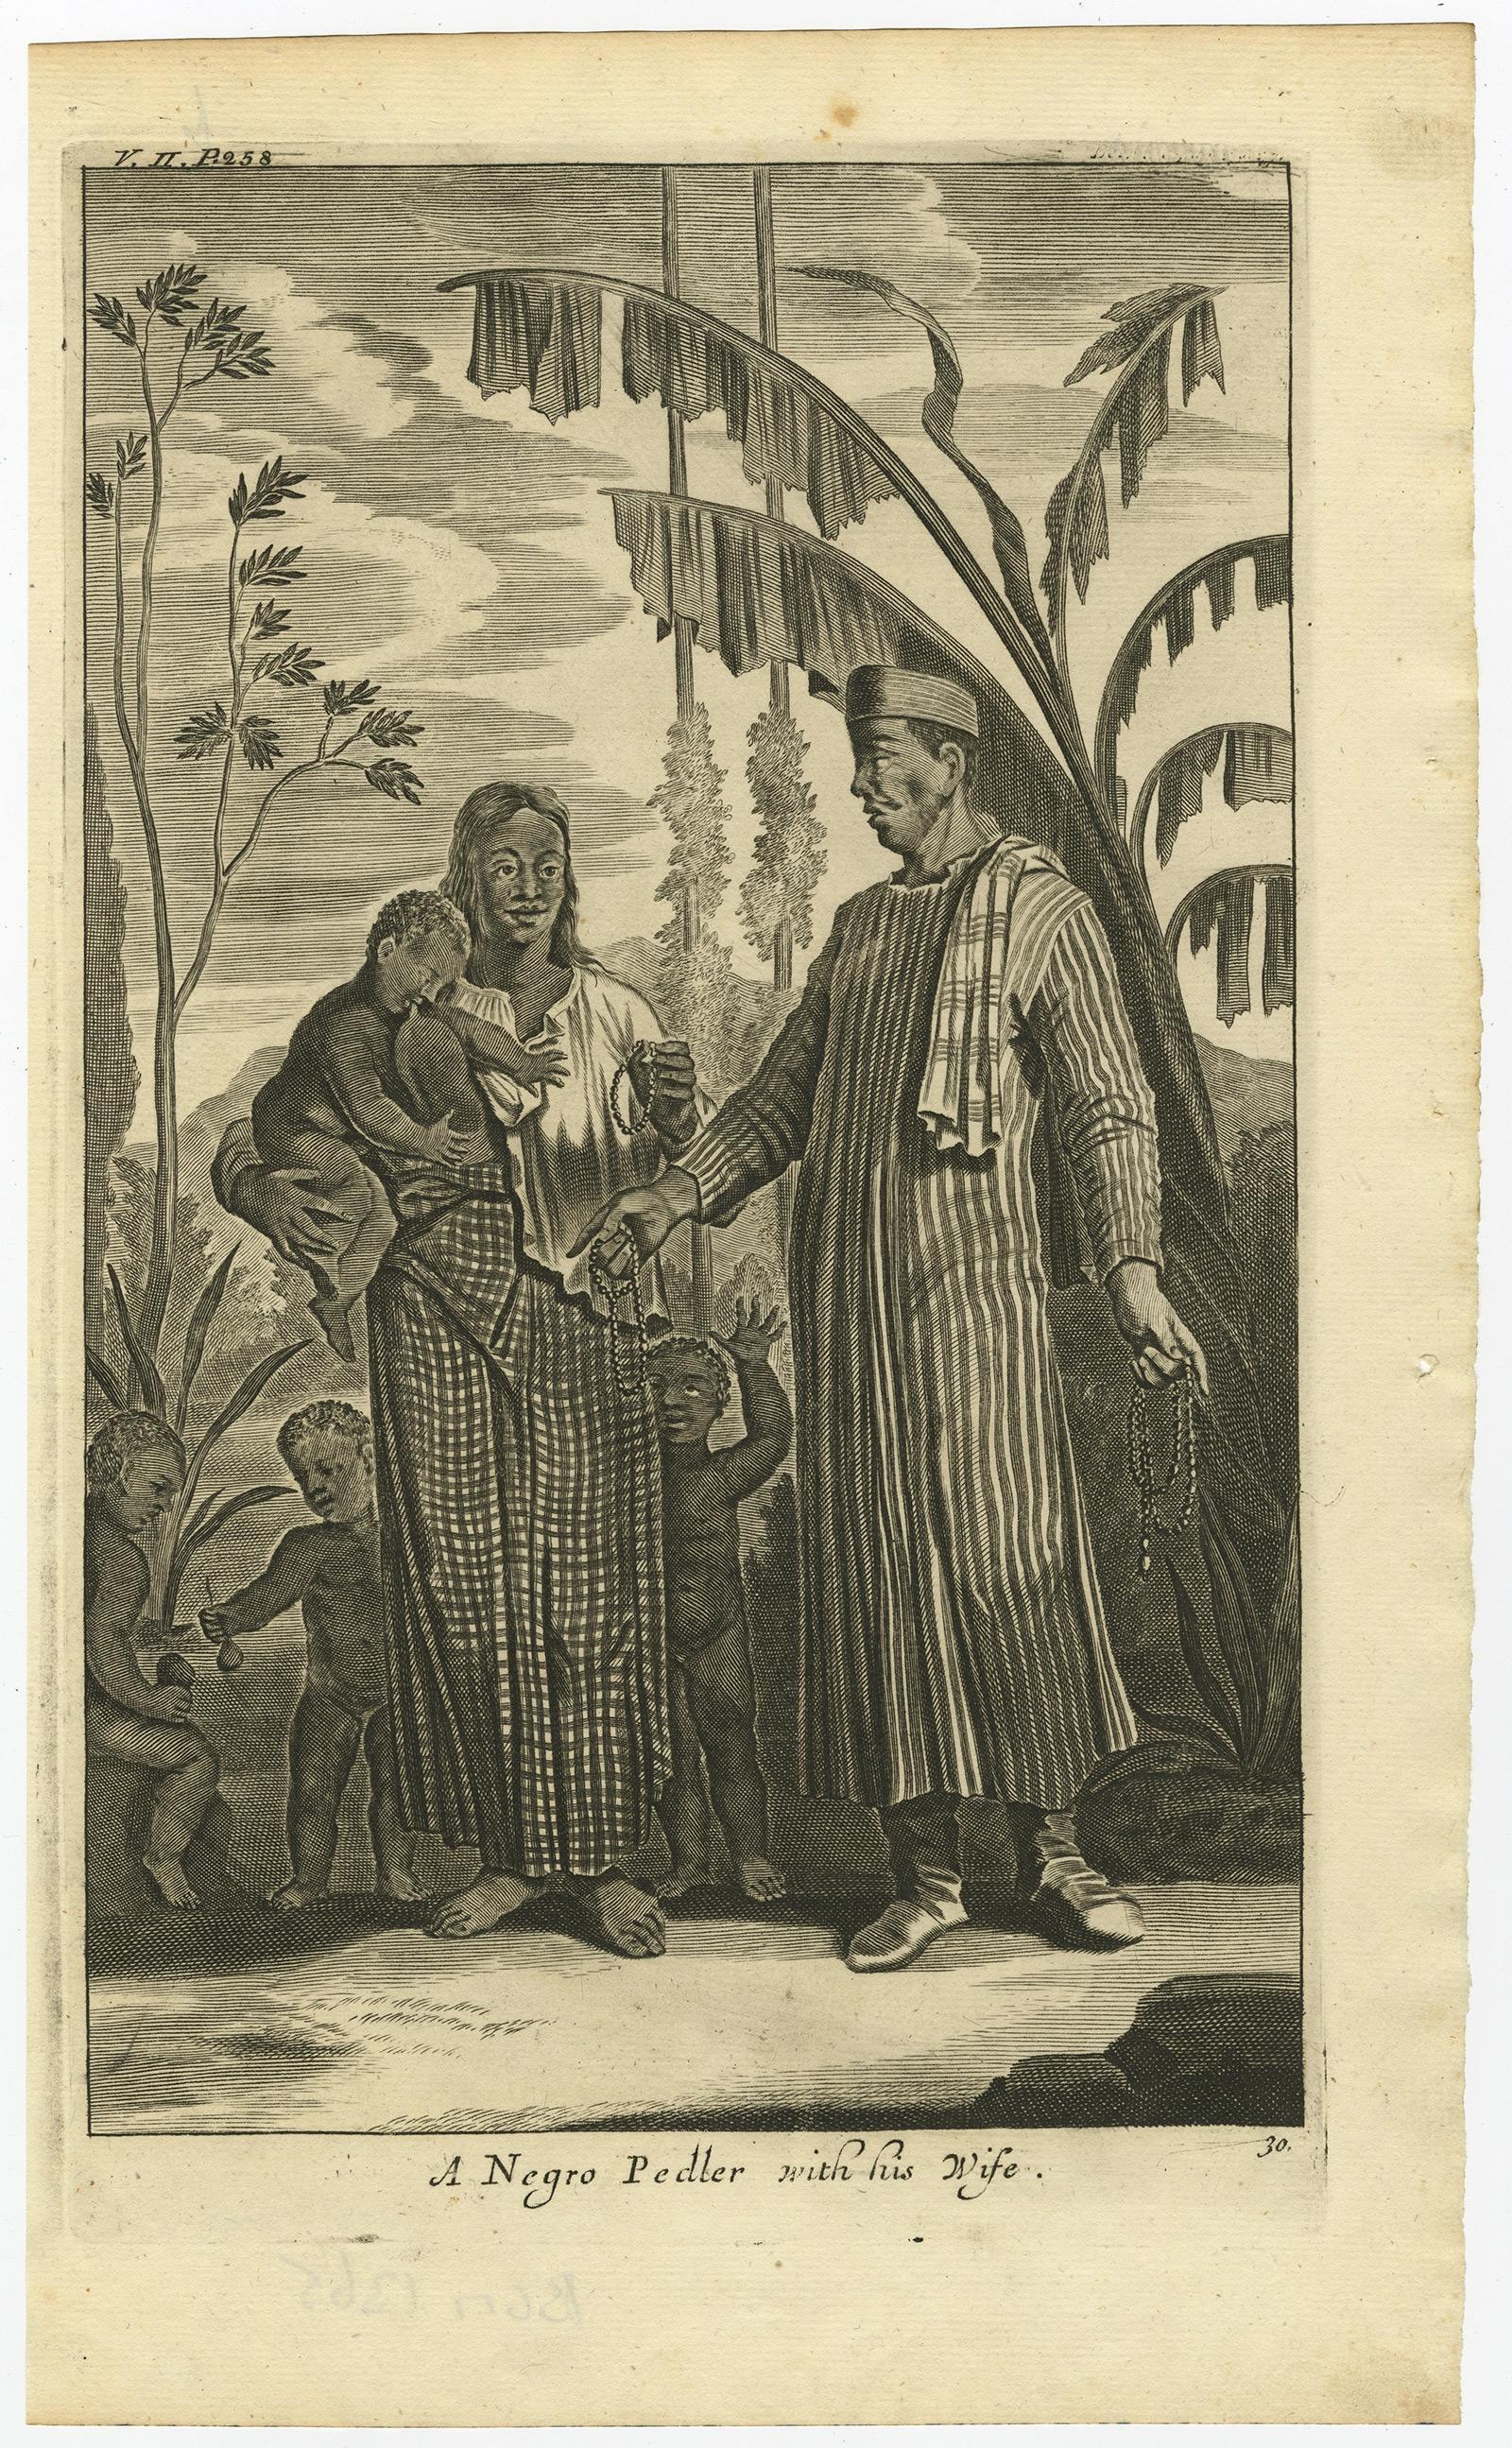 Antique print, titled: 'A Negro Pedler with his wife.' - This plate shows a black skinned peddler and his wife, Indonesia. It originally accompanied J. Nieuhof's account of his 'Voyages and Travels to the East-Indies' in the 17th century. Johan